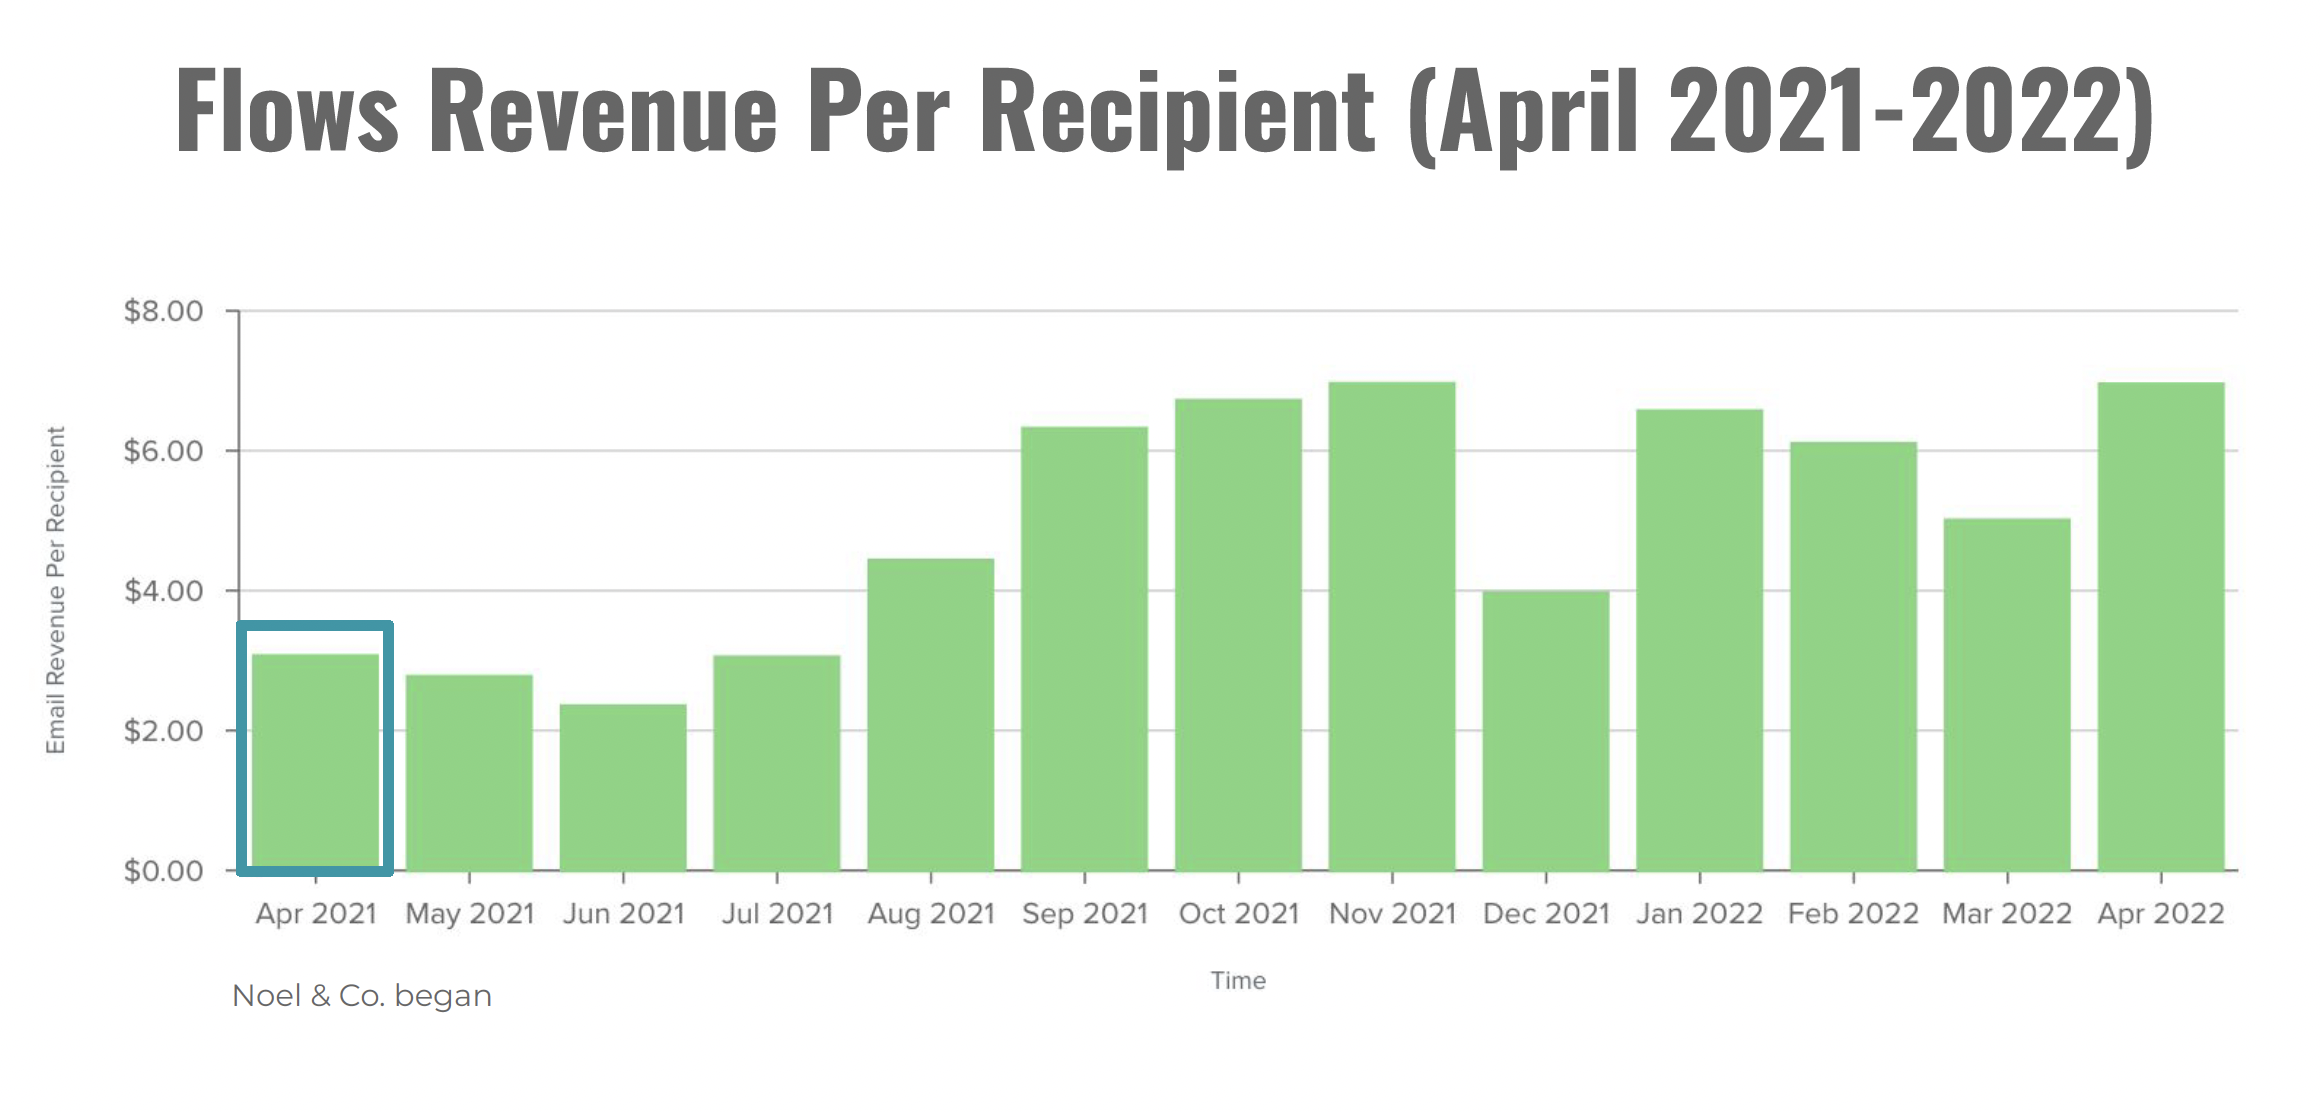 A graph charting out email "flows" revenue per recipient over a year, which trended upwards